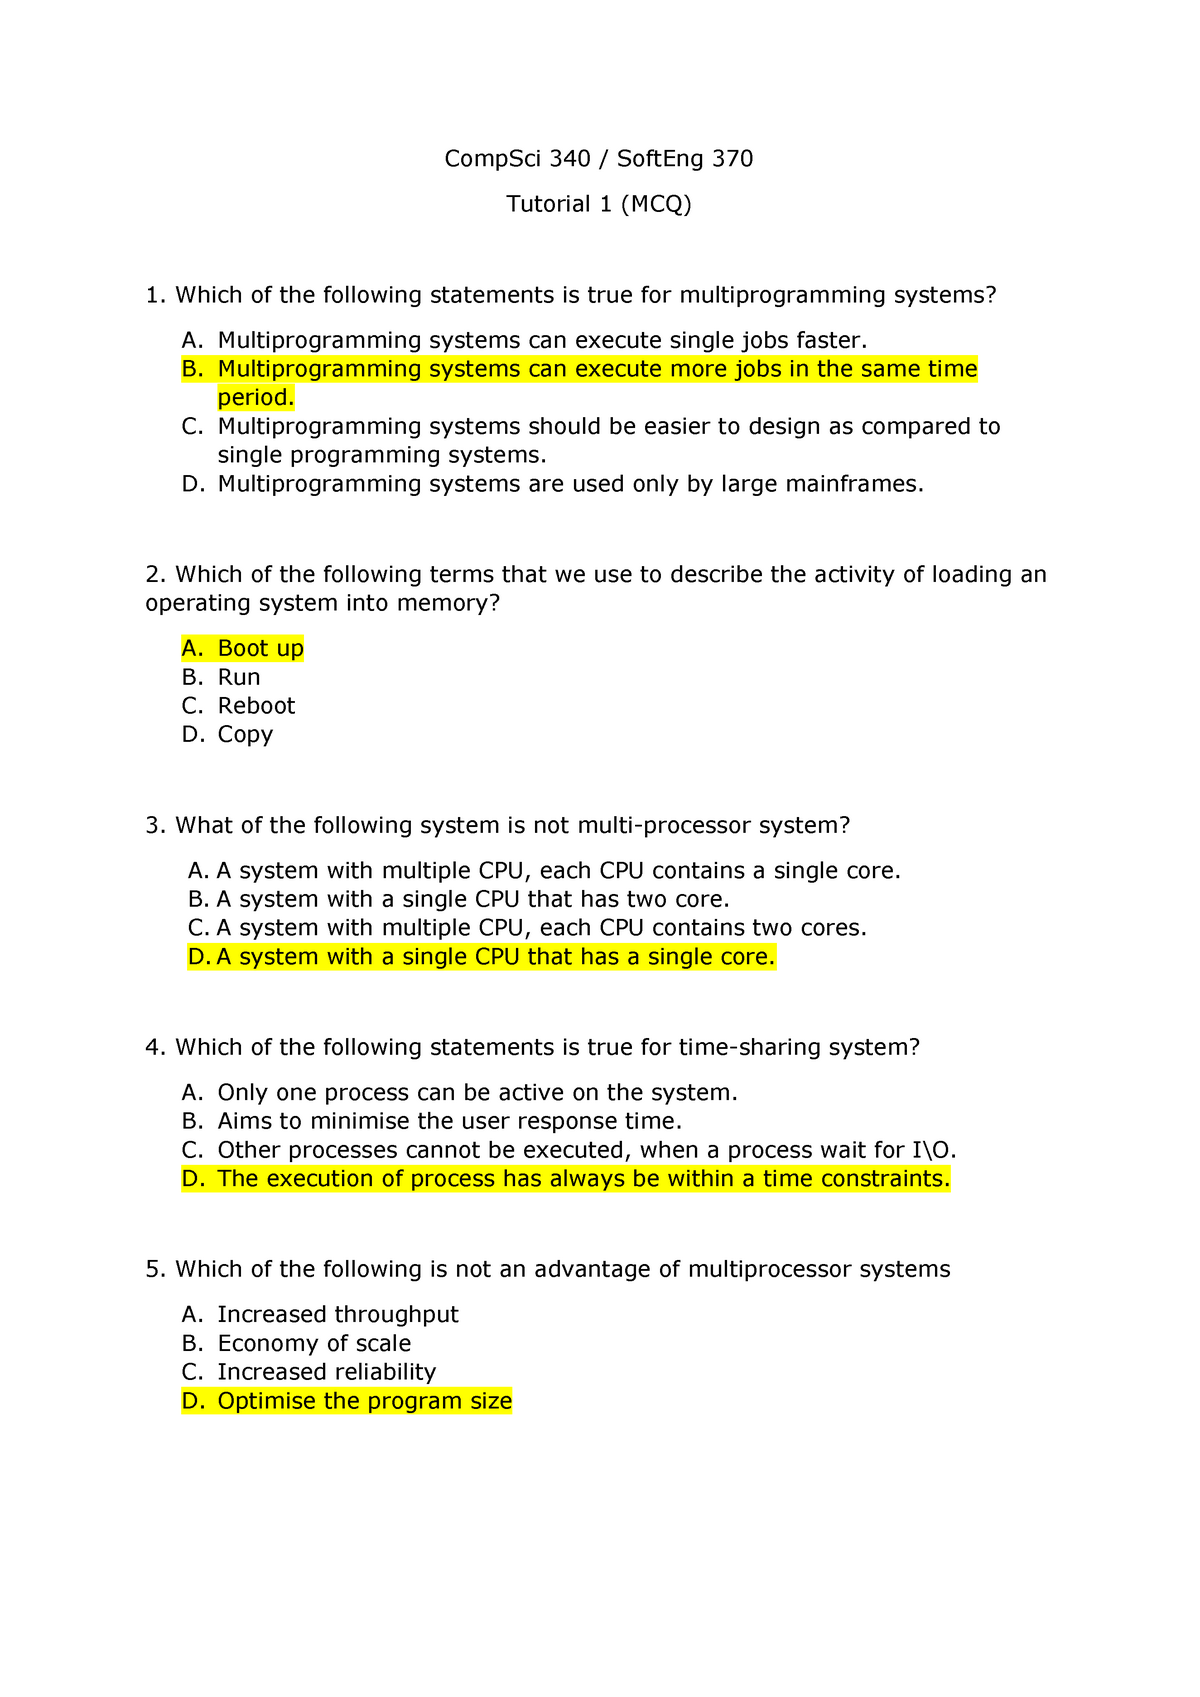 mcq on literature review with answers pdf